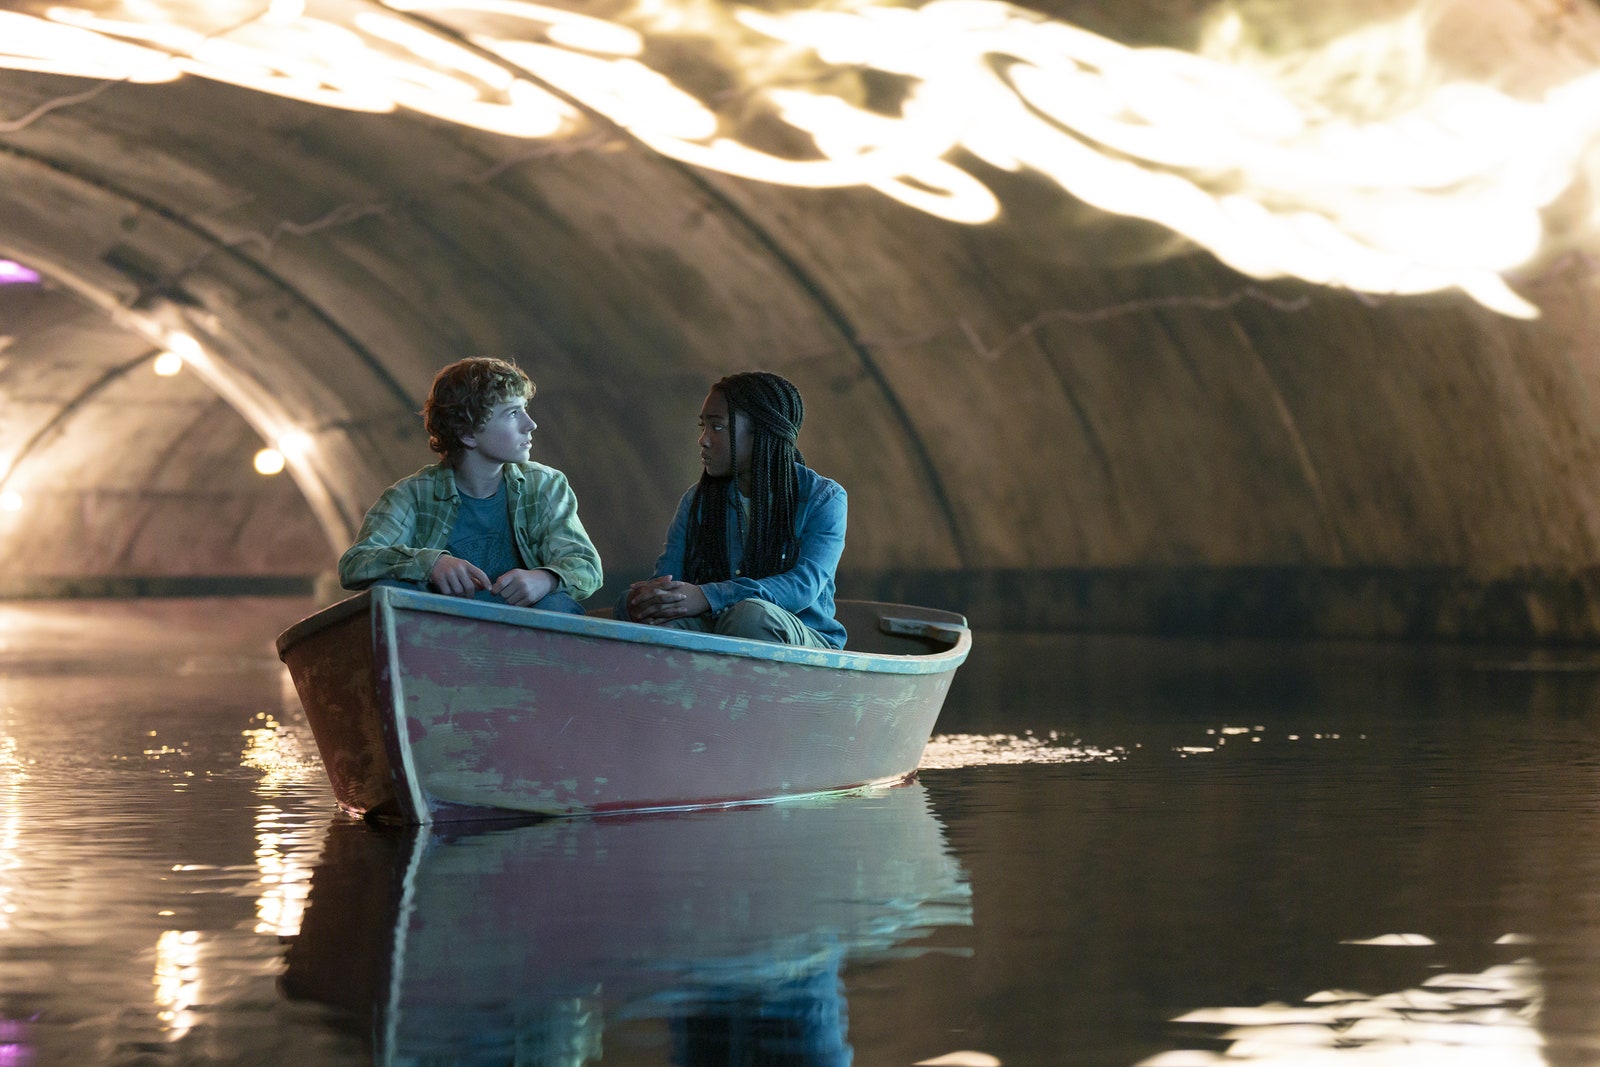 Percy and Annabeth in a boat together